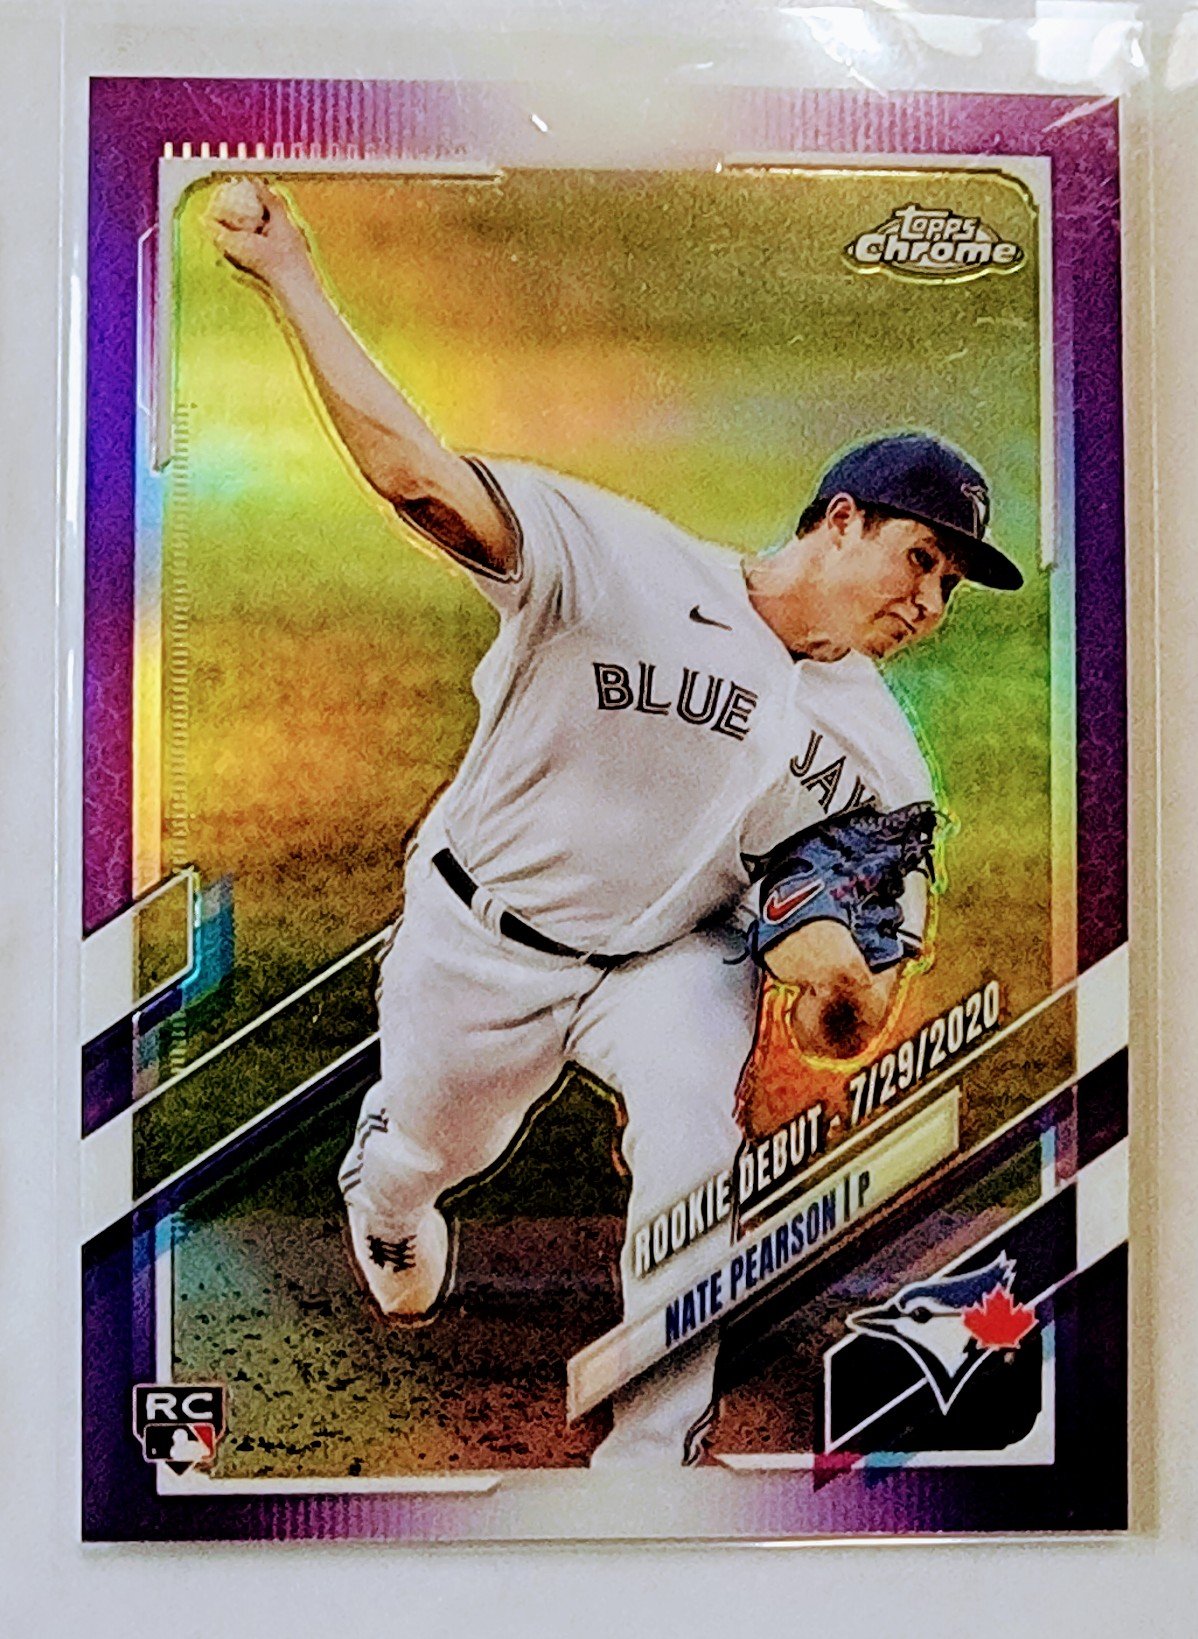 2021 Topps Chrome Update Nate Pearson Rookie Debut Purple Refractor Rookie Baseball Card AVM1 simple Xclusive Collectibles   